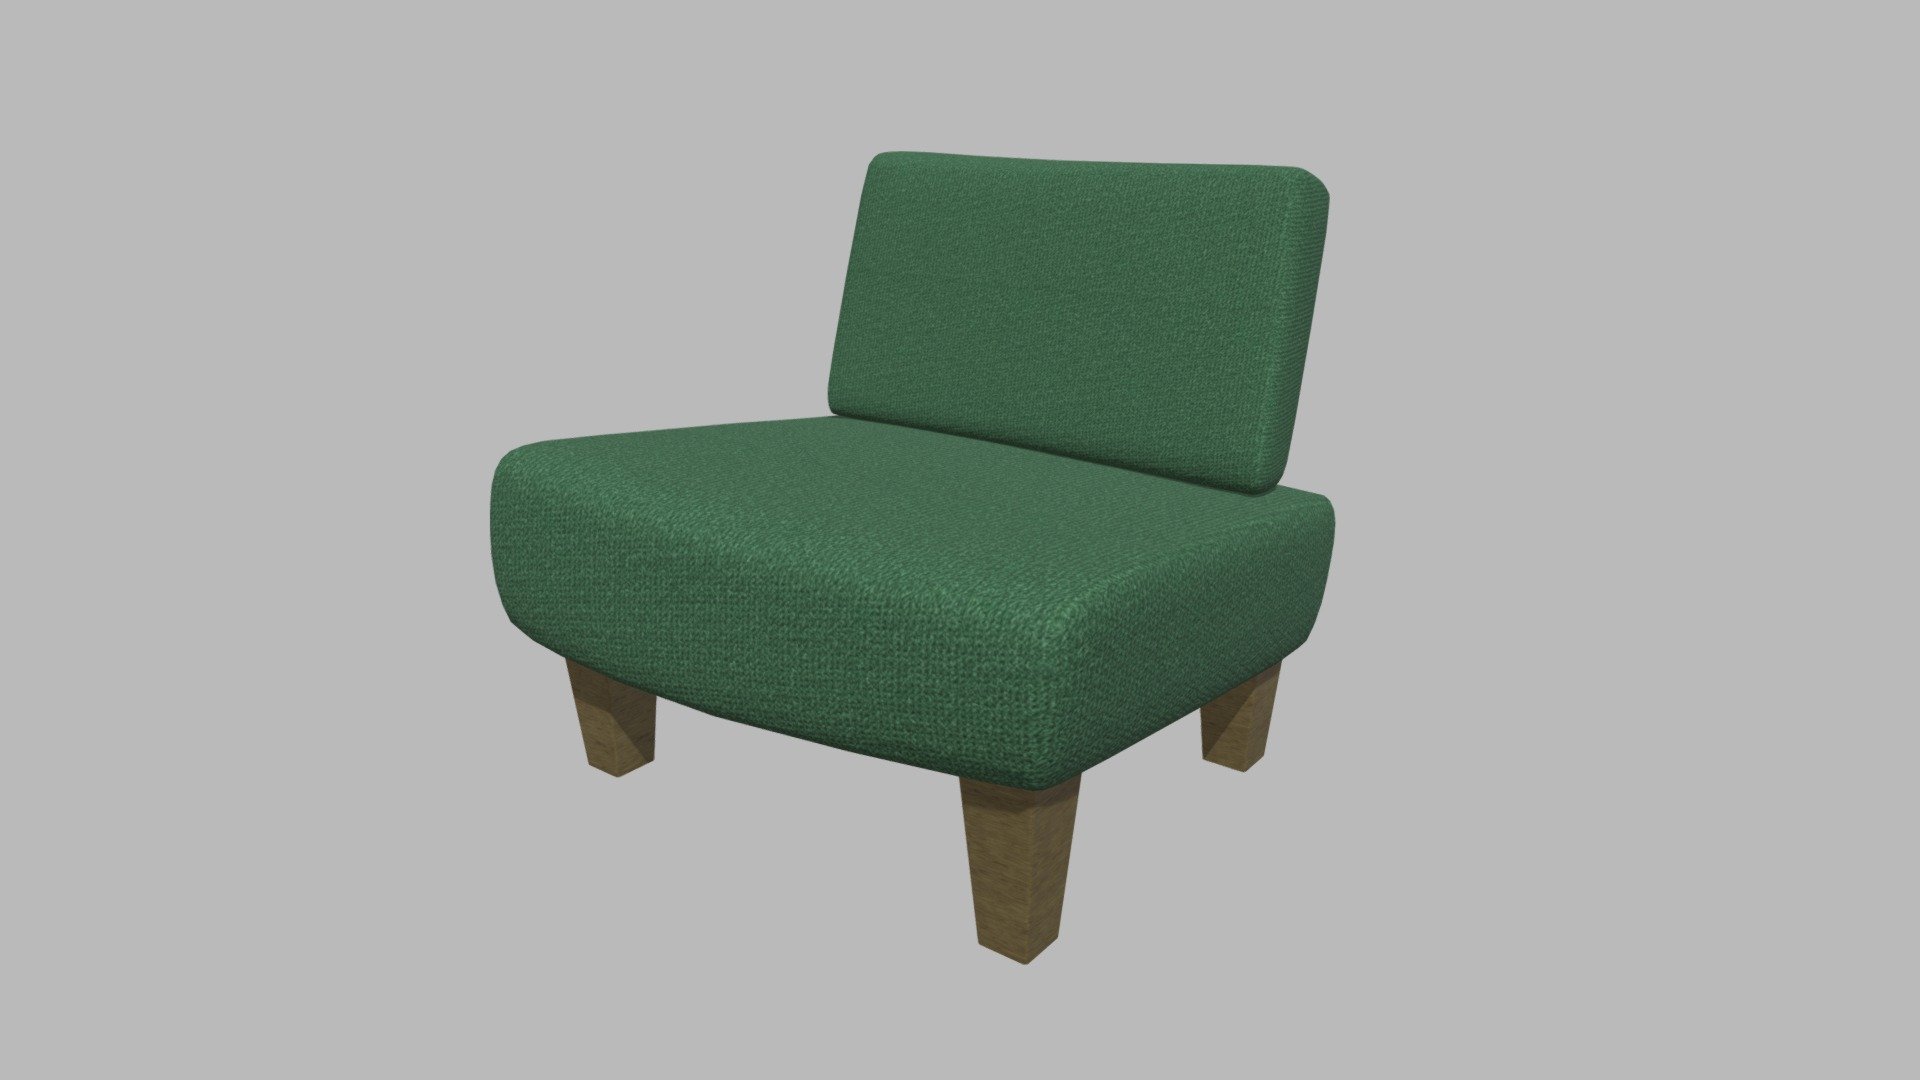 This model contains a Custom Armchair 01 based on a custom stylized furniture which i modeled in Maya 2018. This model is perfect to create a new great scene from a house or an office or whatever you think is great.

If you need any kind of help contact me, i will help you with everything i can. If you like the model please give me some feedback, I would appreciate it.

If you experience any kind of difficulties, be sure to contact me and i will help you. Sincerely Yours, ViperJr3D - Custom Armchair 01 - Buy Royalty Free 3D model by ViperJr3D 3d model